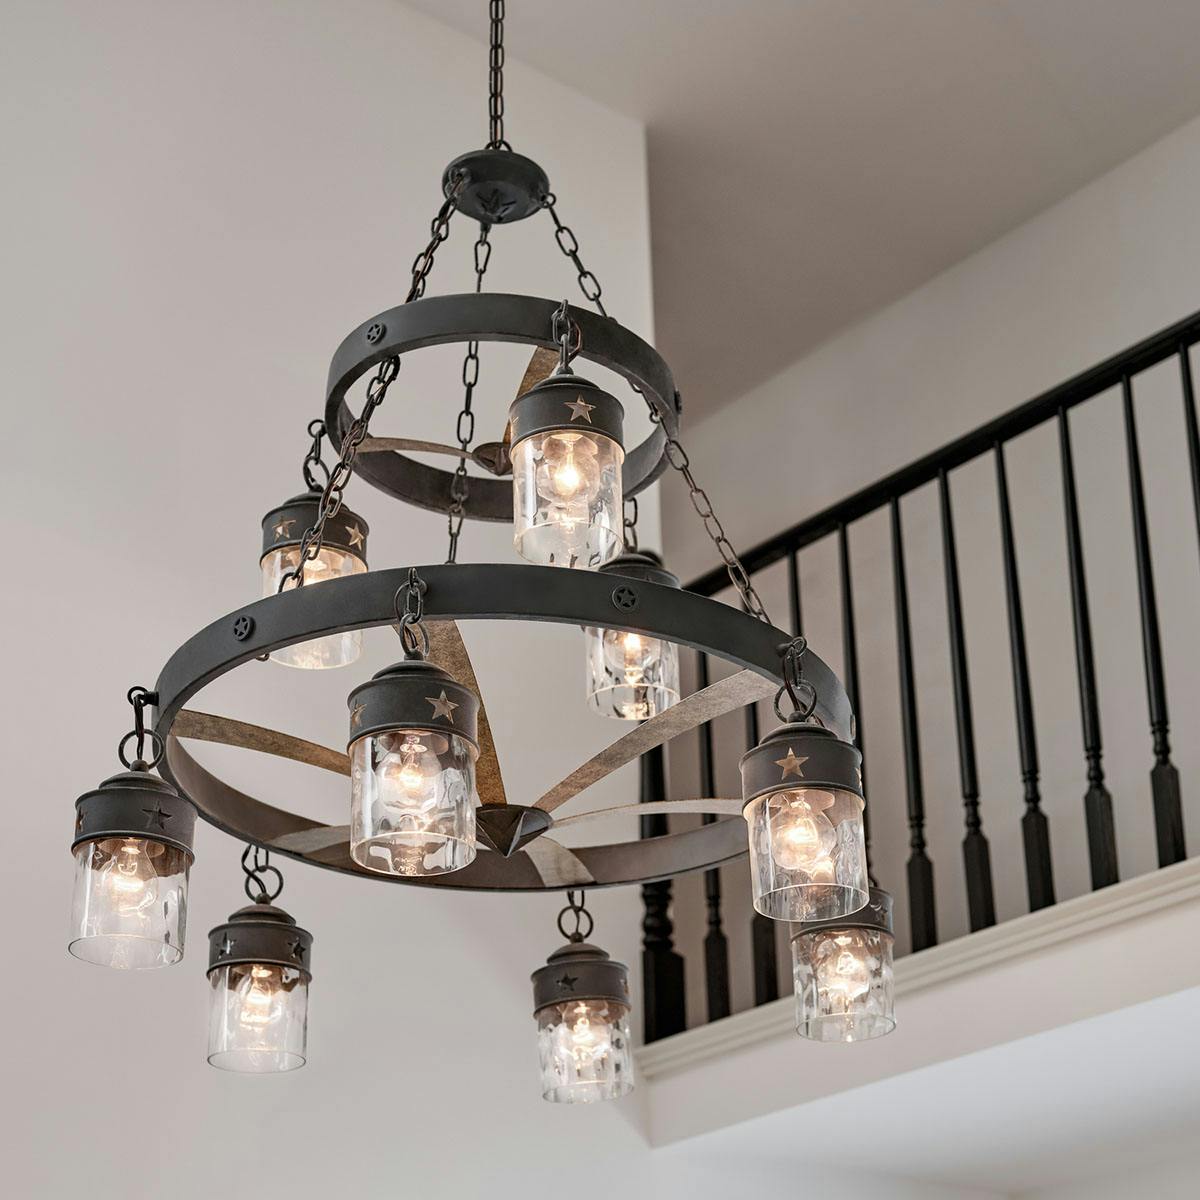 Day time Foyer image featuring Grainger chandelier 82337